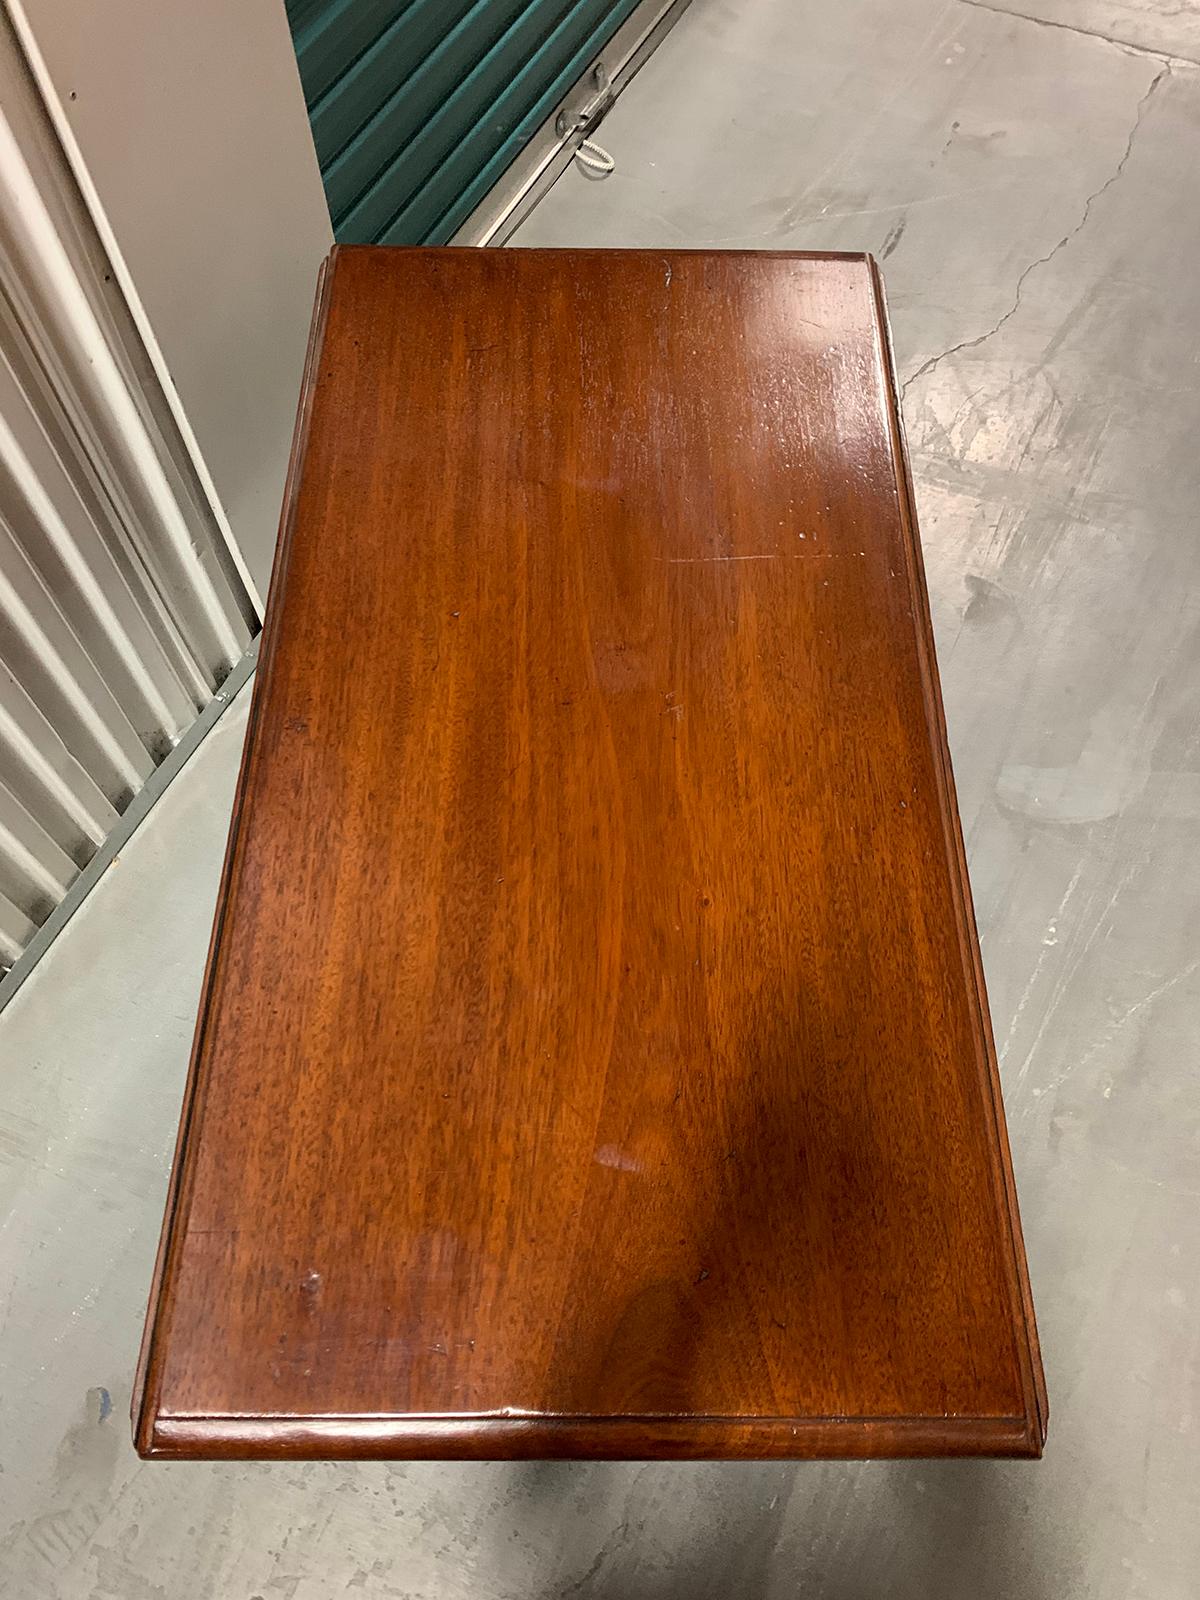 19th-20th Century Drop-Leaf Table For Sale 2